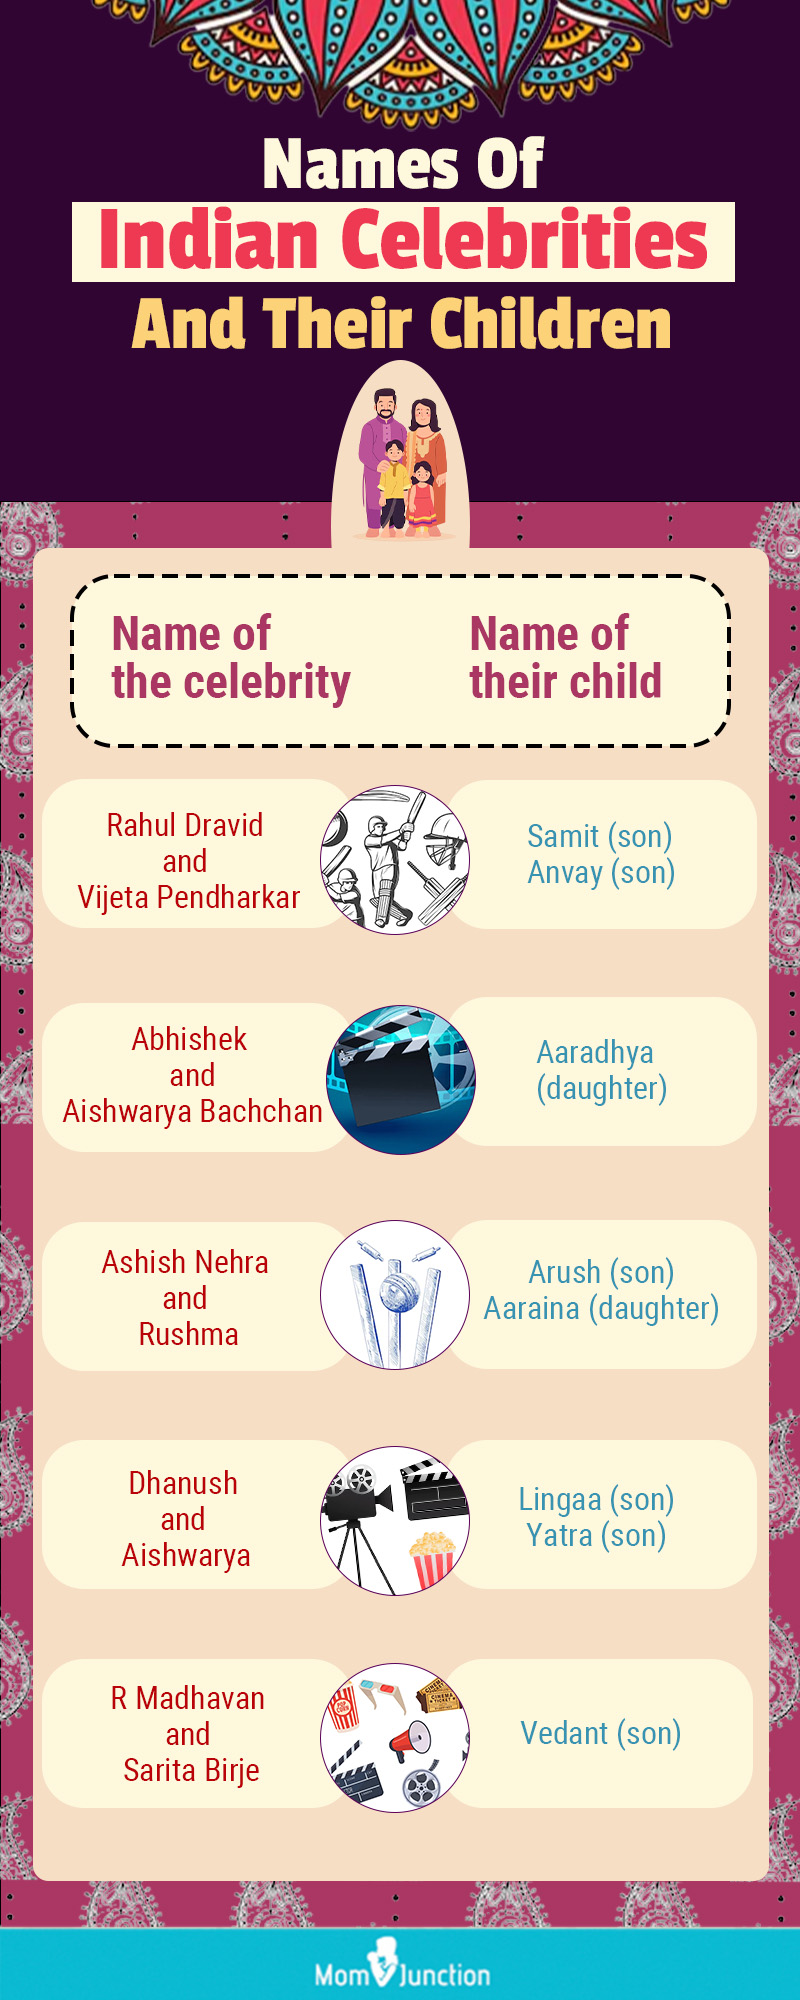 Meaning of Rithik  Indian baby names, Names with meaning, Baby names and  meanings